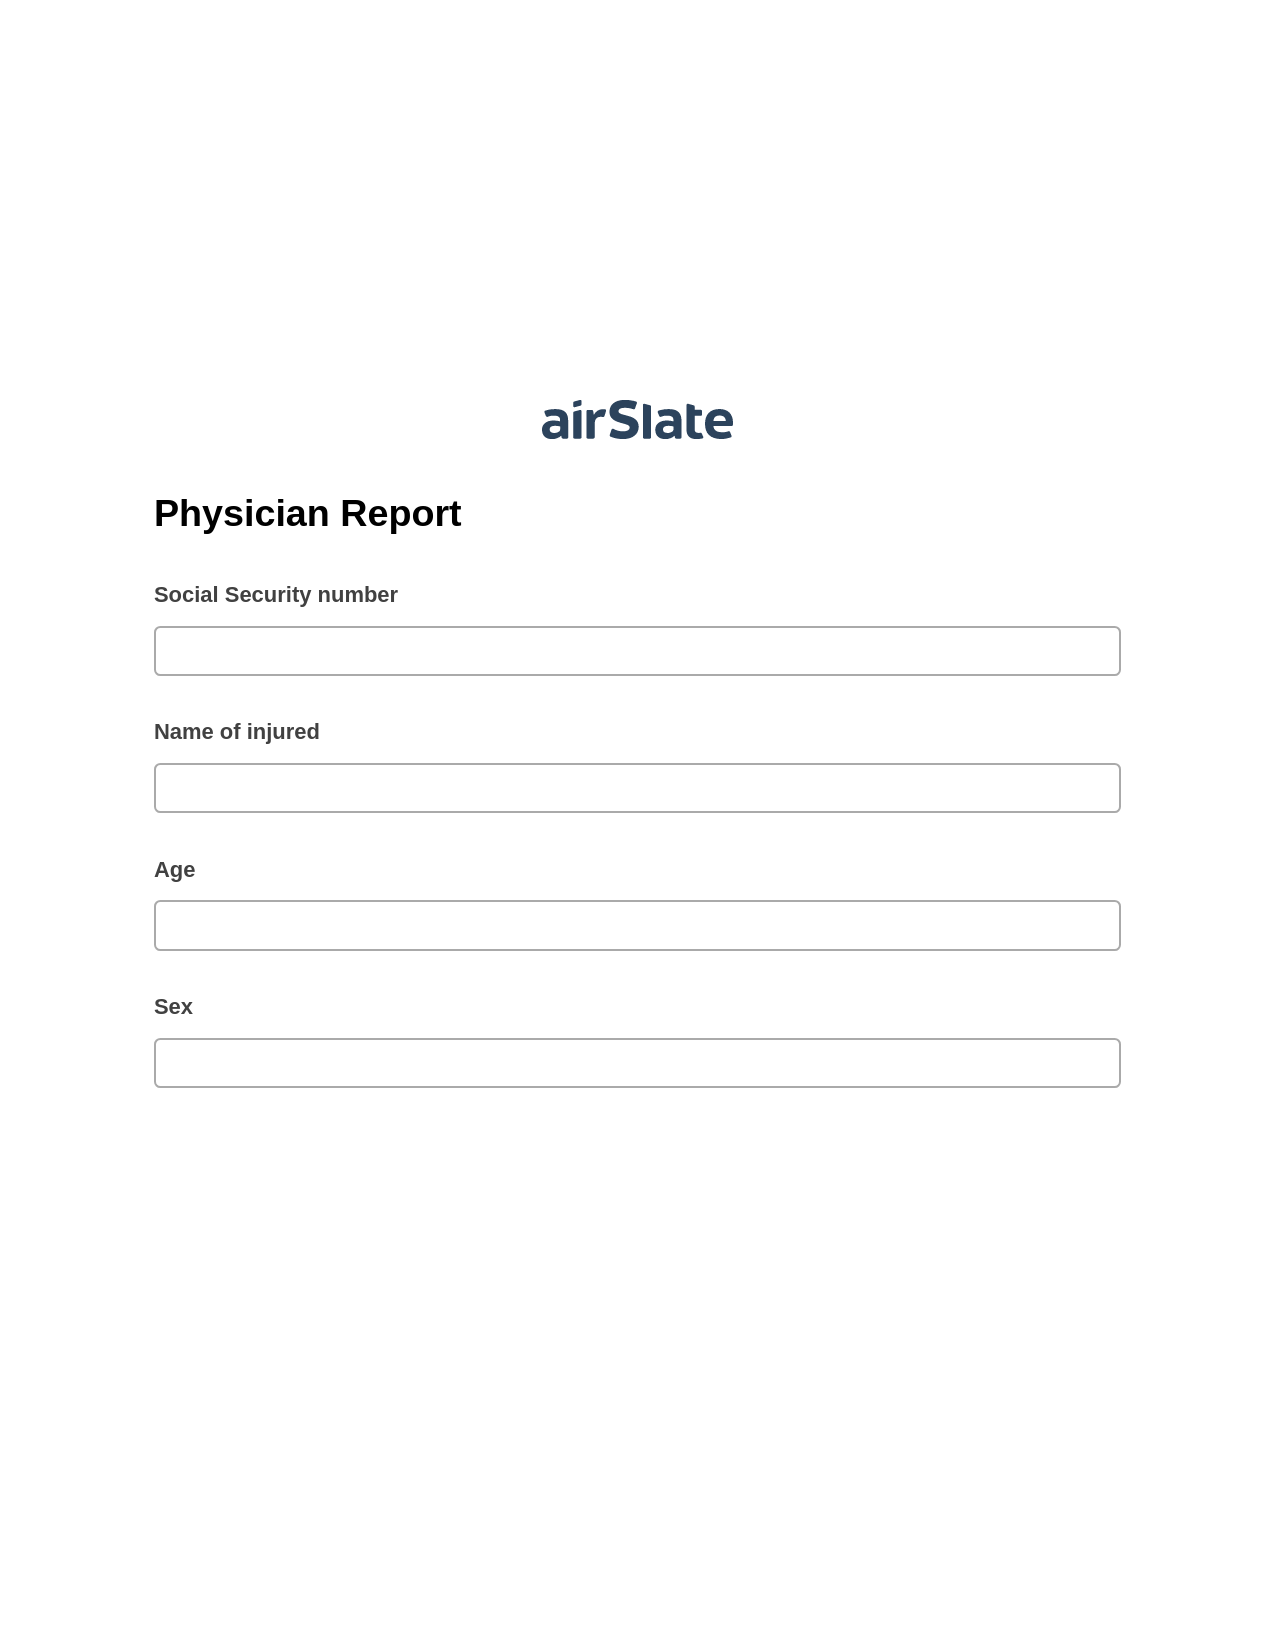 Physician Report Pre-fill from Salesforce Records Bot, Unassign Role Bot, Export to WebMerge Bot